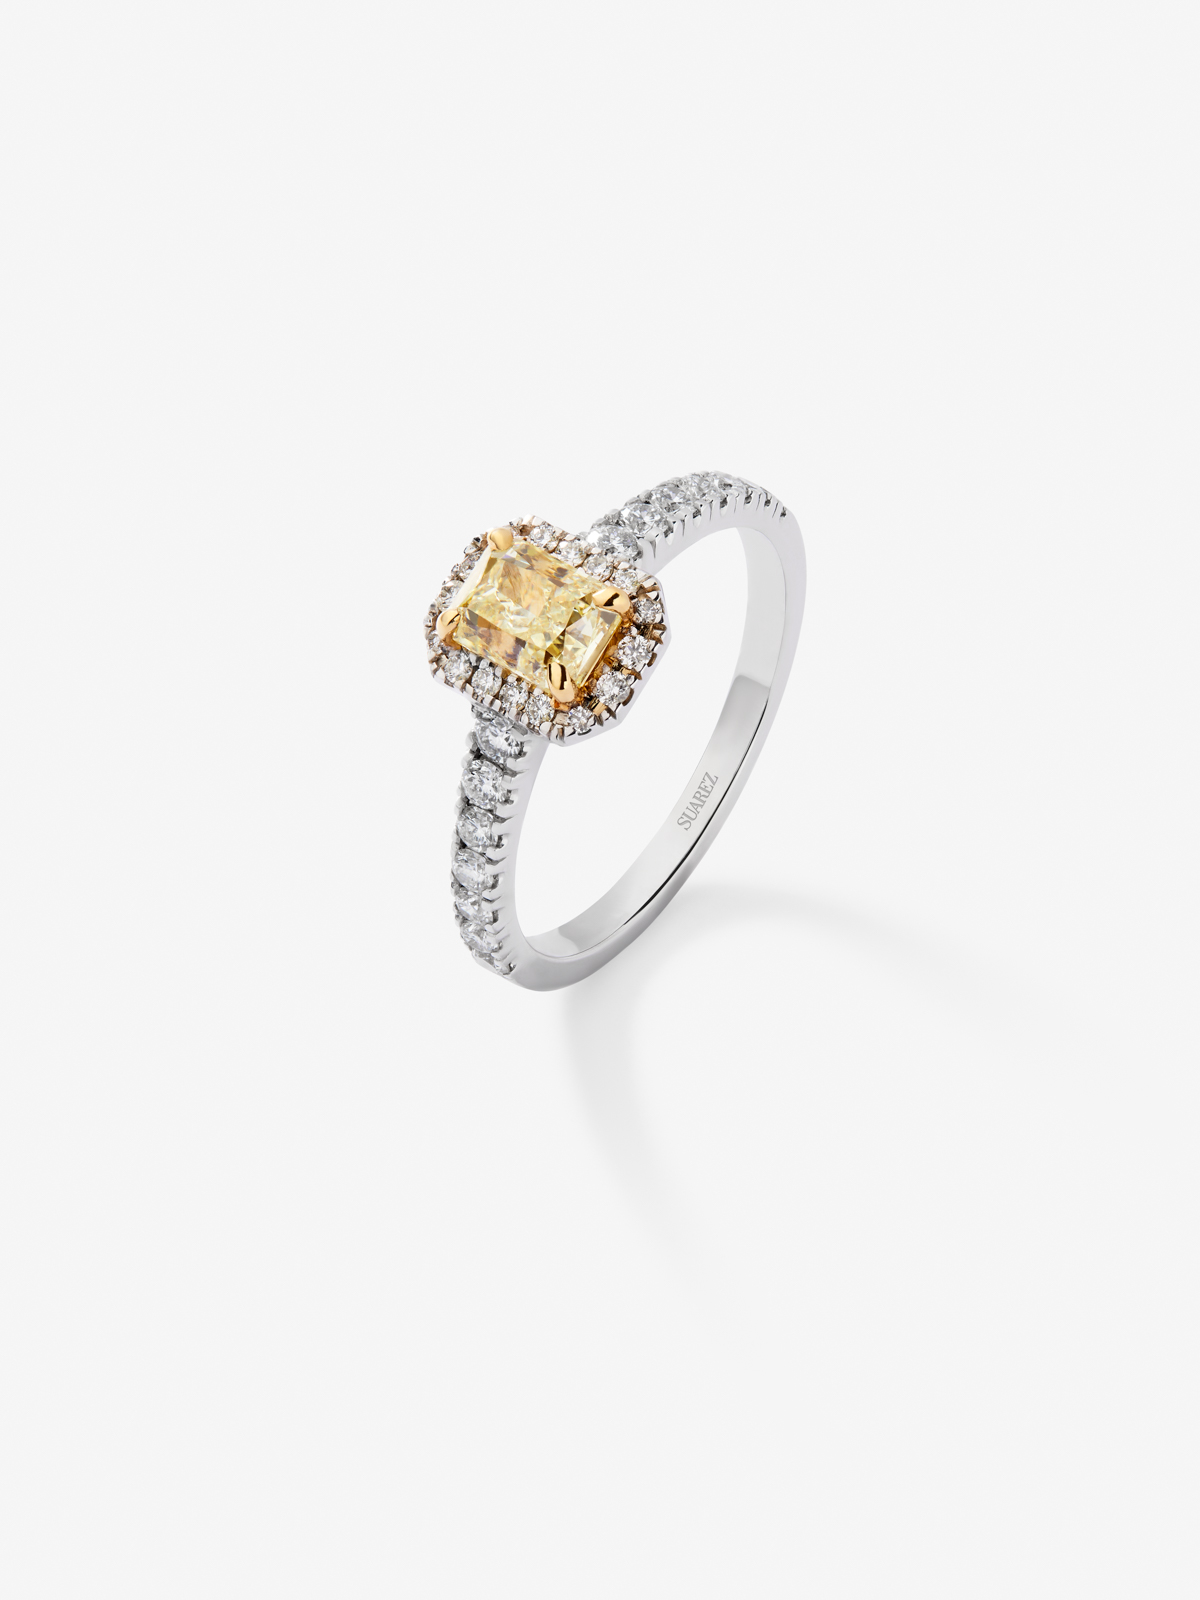 18K white gold ring with yellow diamond in radiant size of 1 cts and white diamonds in bright size of 0.49 cts